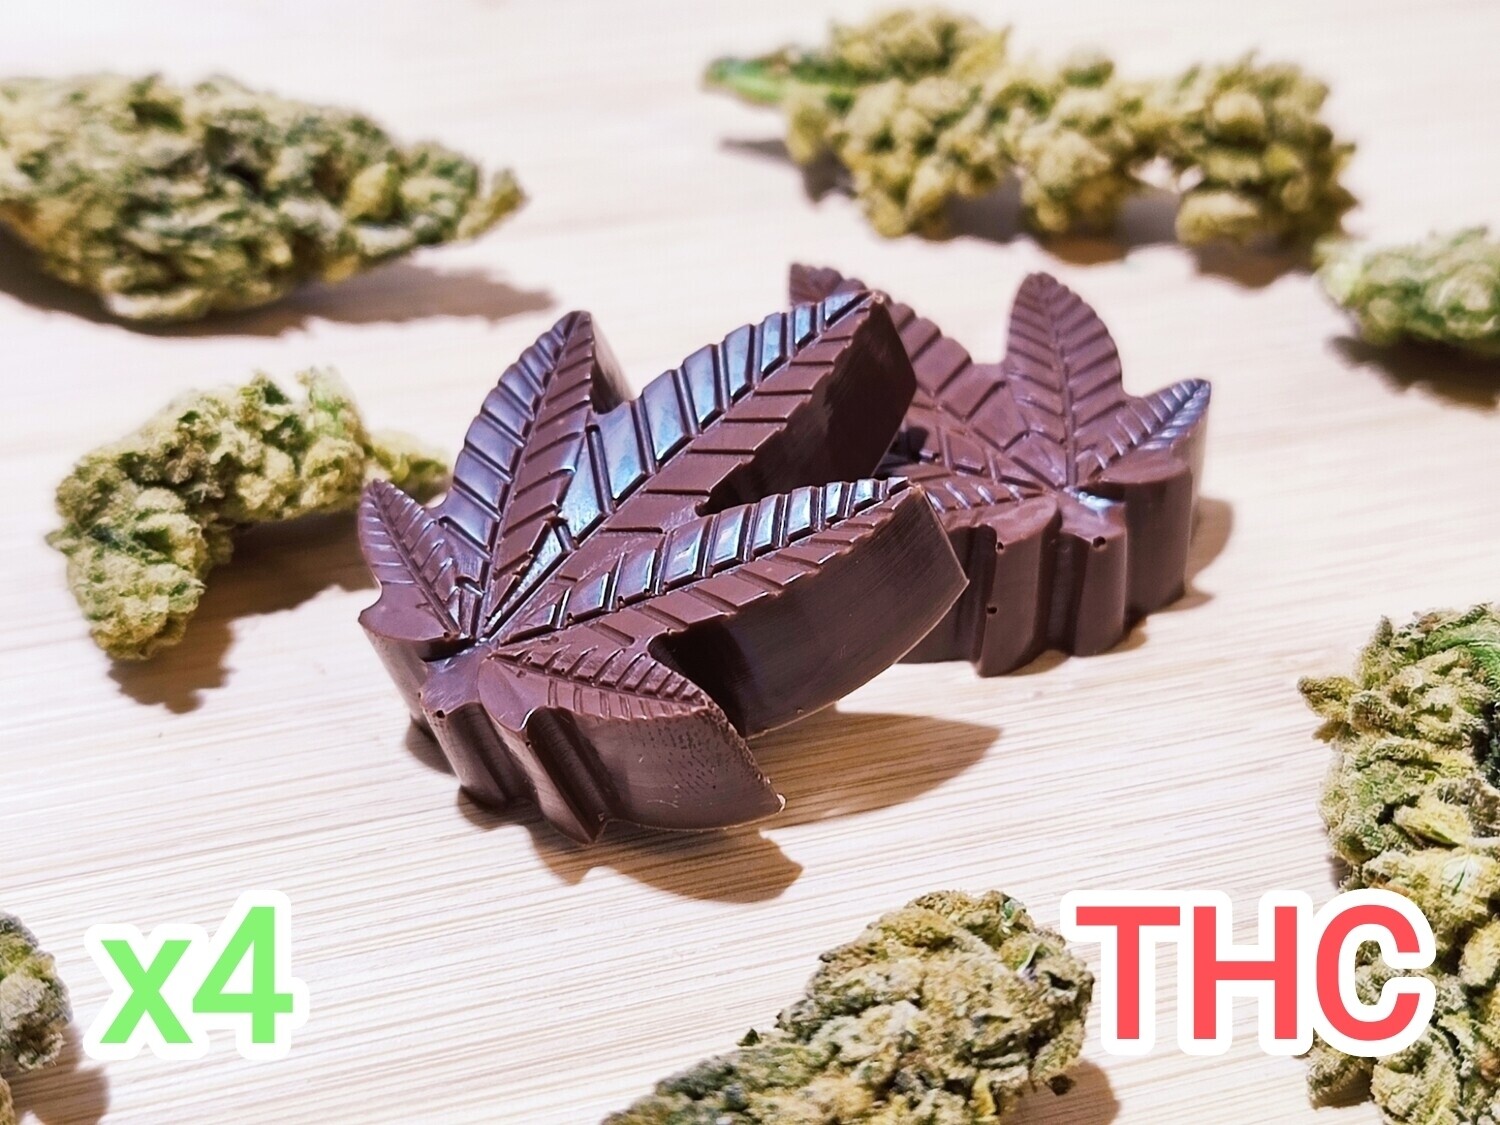 100mg THC Infused Chocolates Leaves - 25mg each (x4)